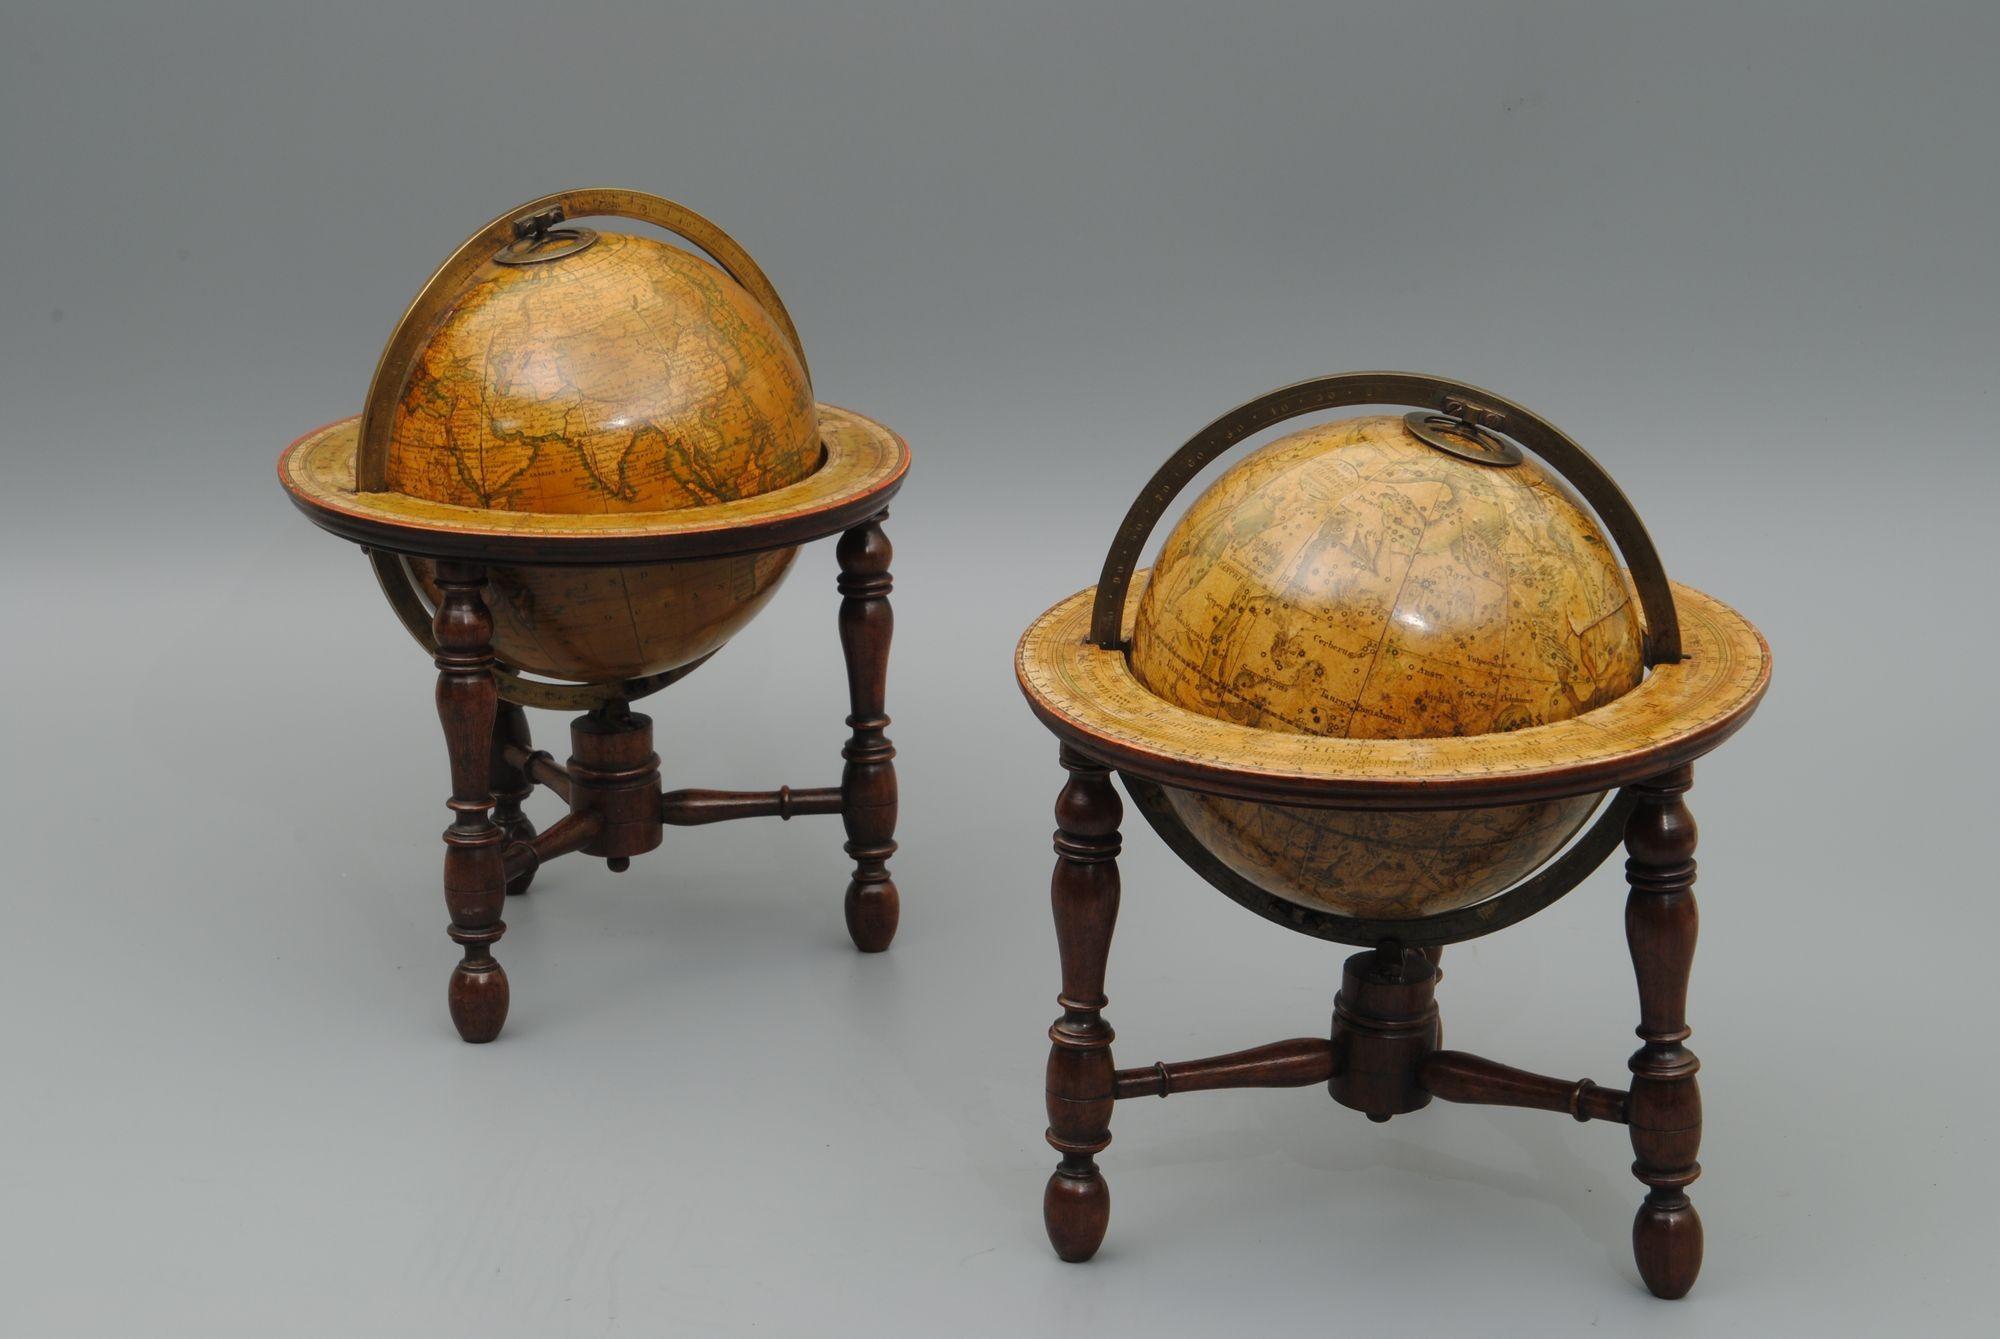 A charming pair of celestial and terrestrial early 19th century table globes of a rare small size by Newton, London.